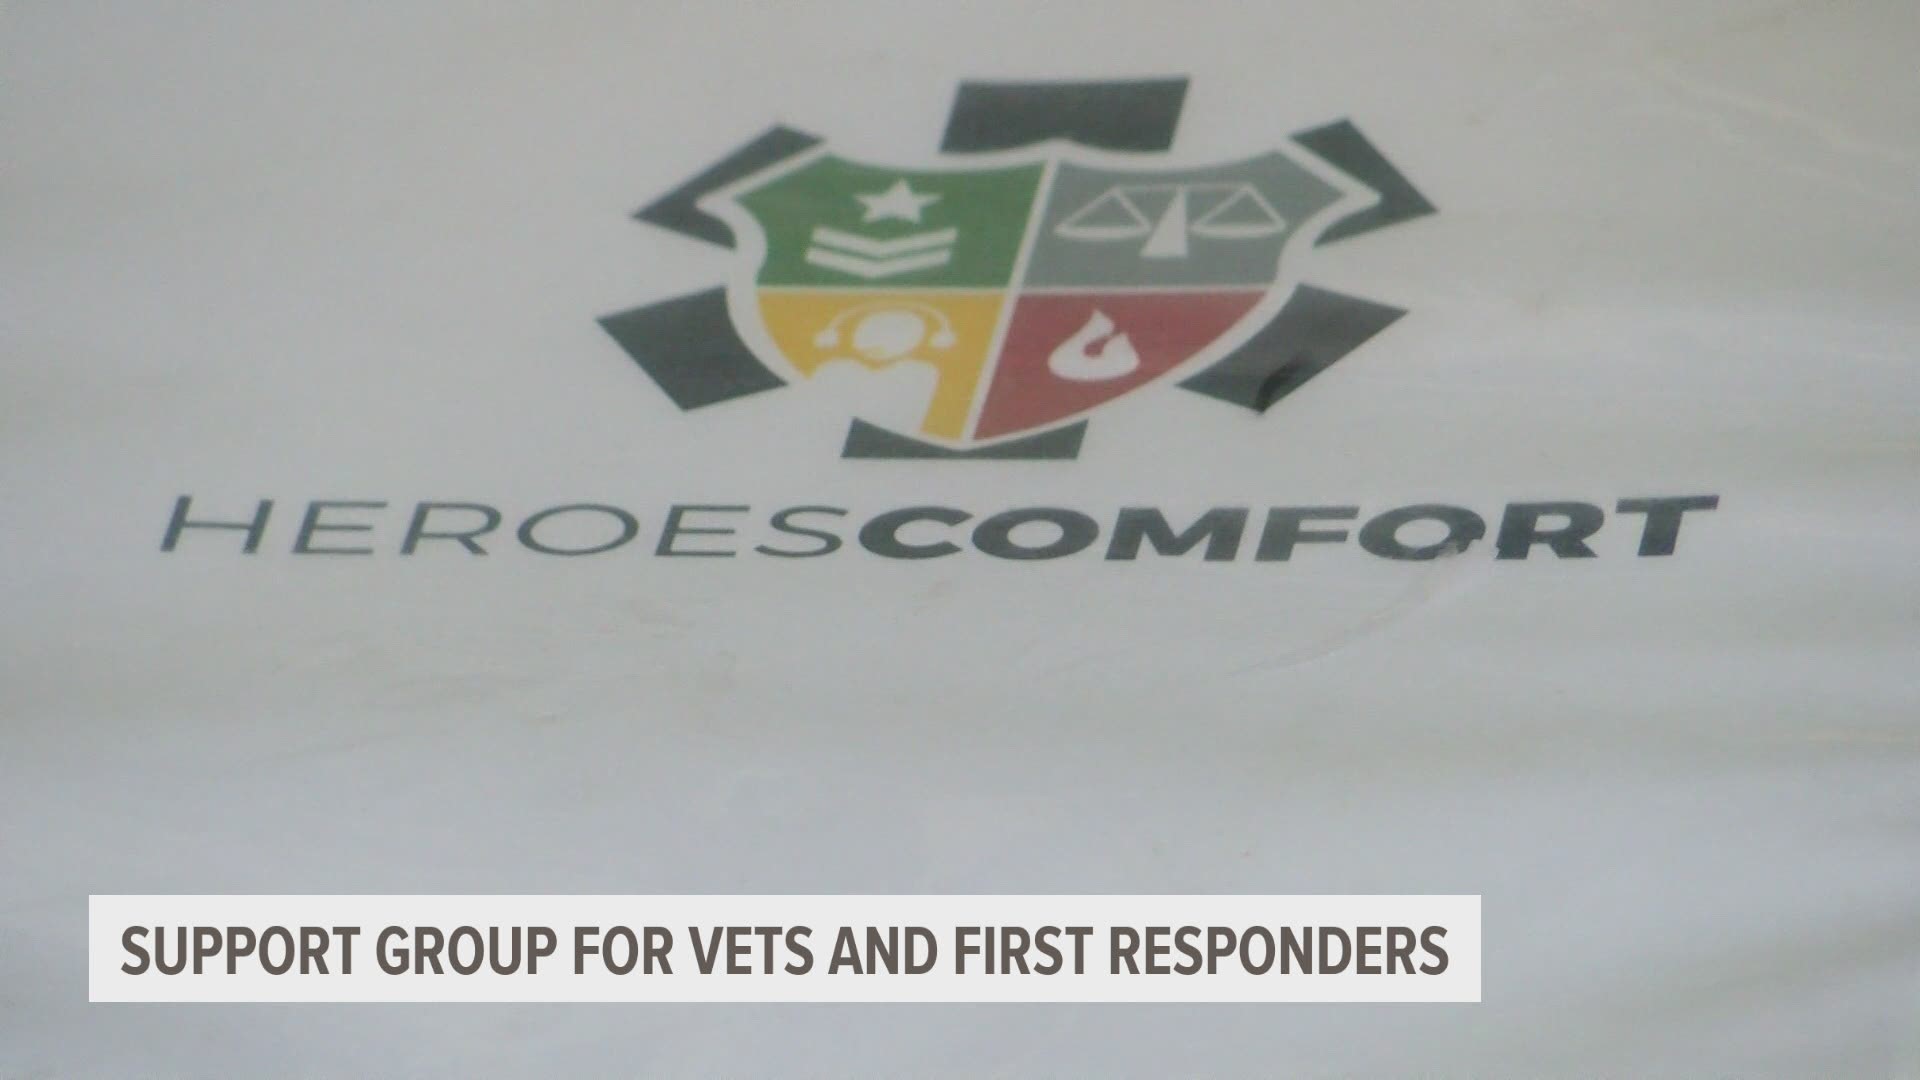 The soon-to-be non-profit includes a peer-to-peer support group for veterans and first responders as well as offering three free counseling sessions.